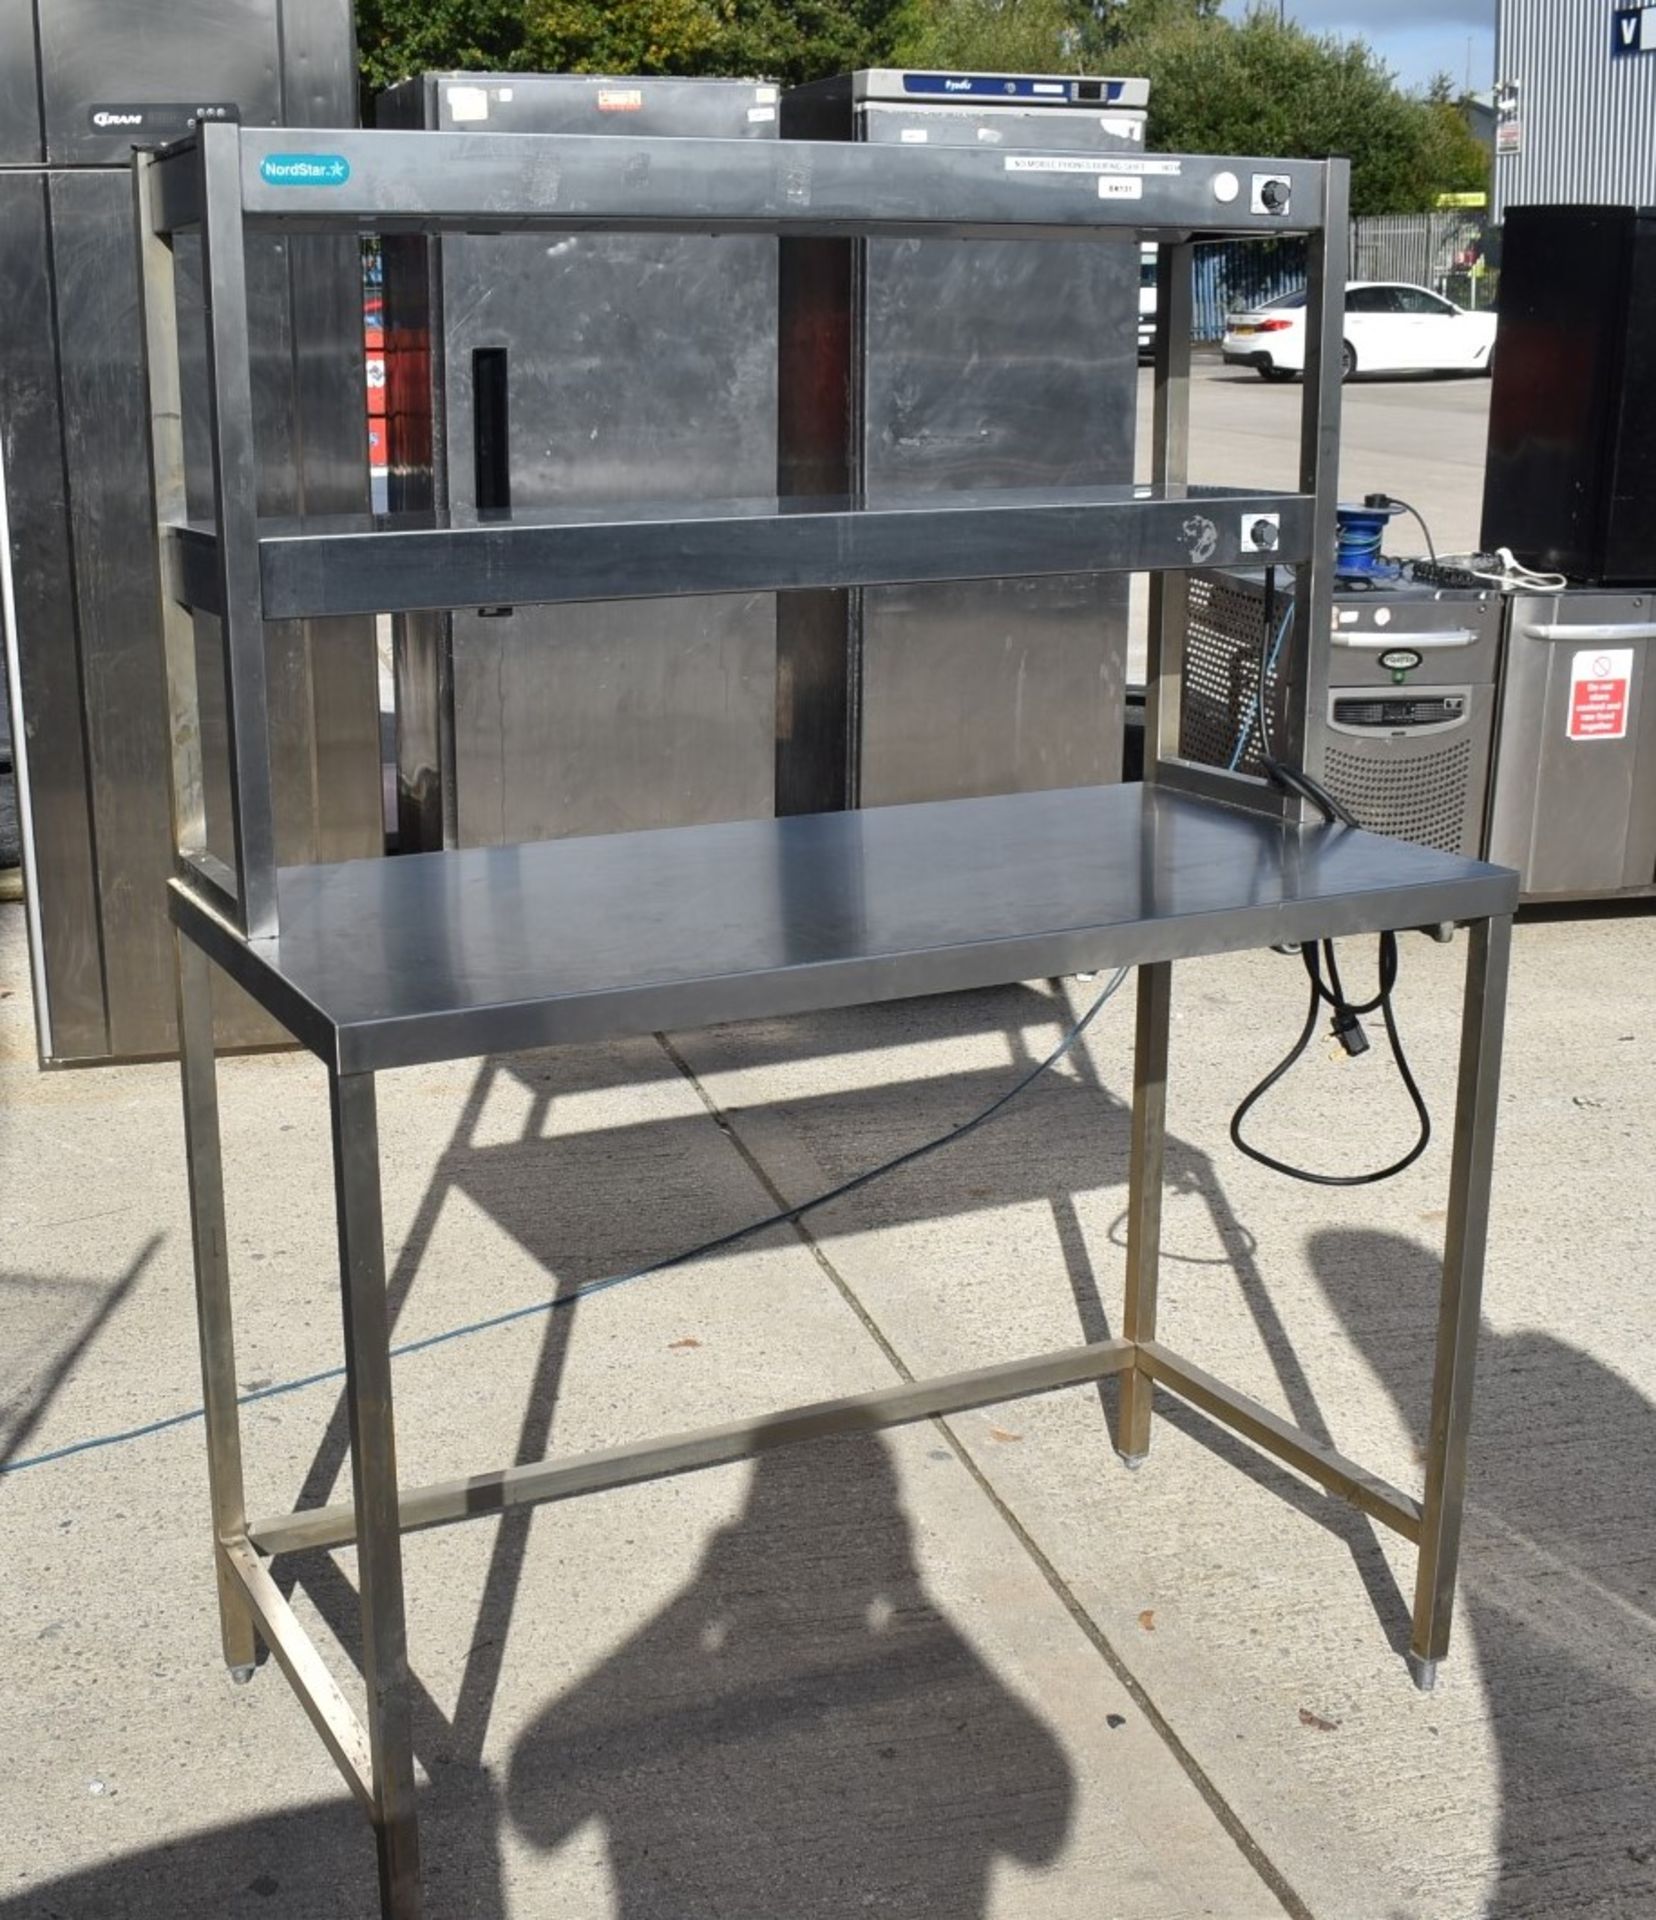 1 x Heated Passthrough Gantry Prep Table With Two Shelves and Adjustable Heat Controls - Image 2 of 9